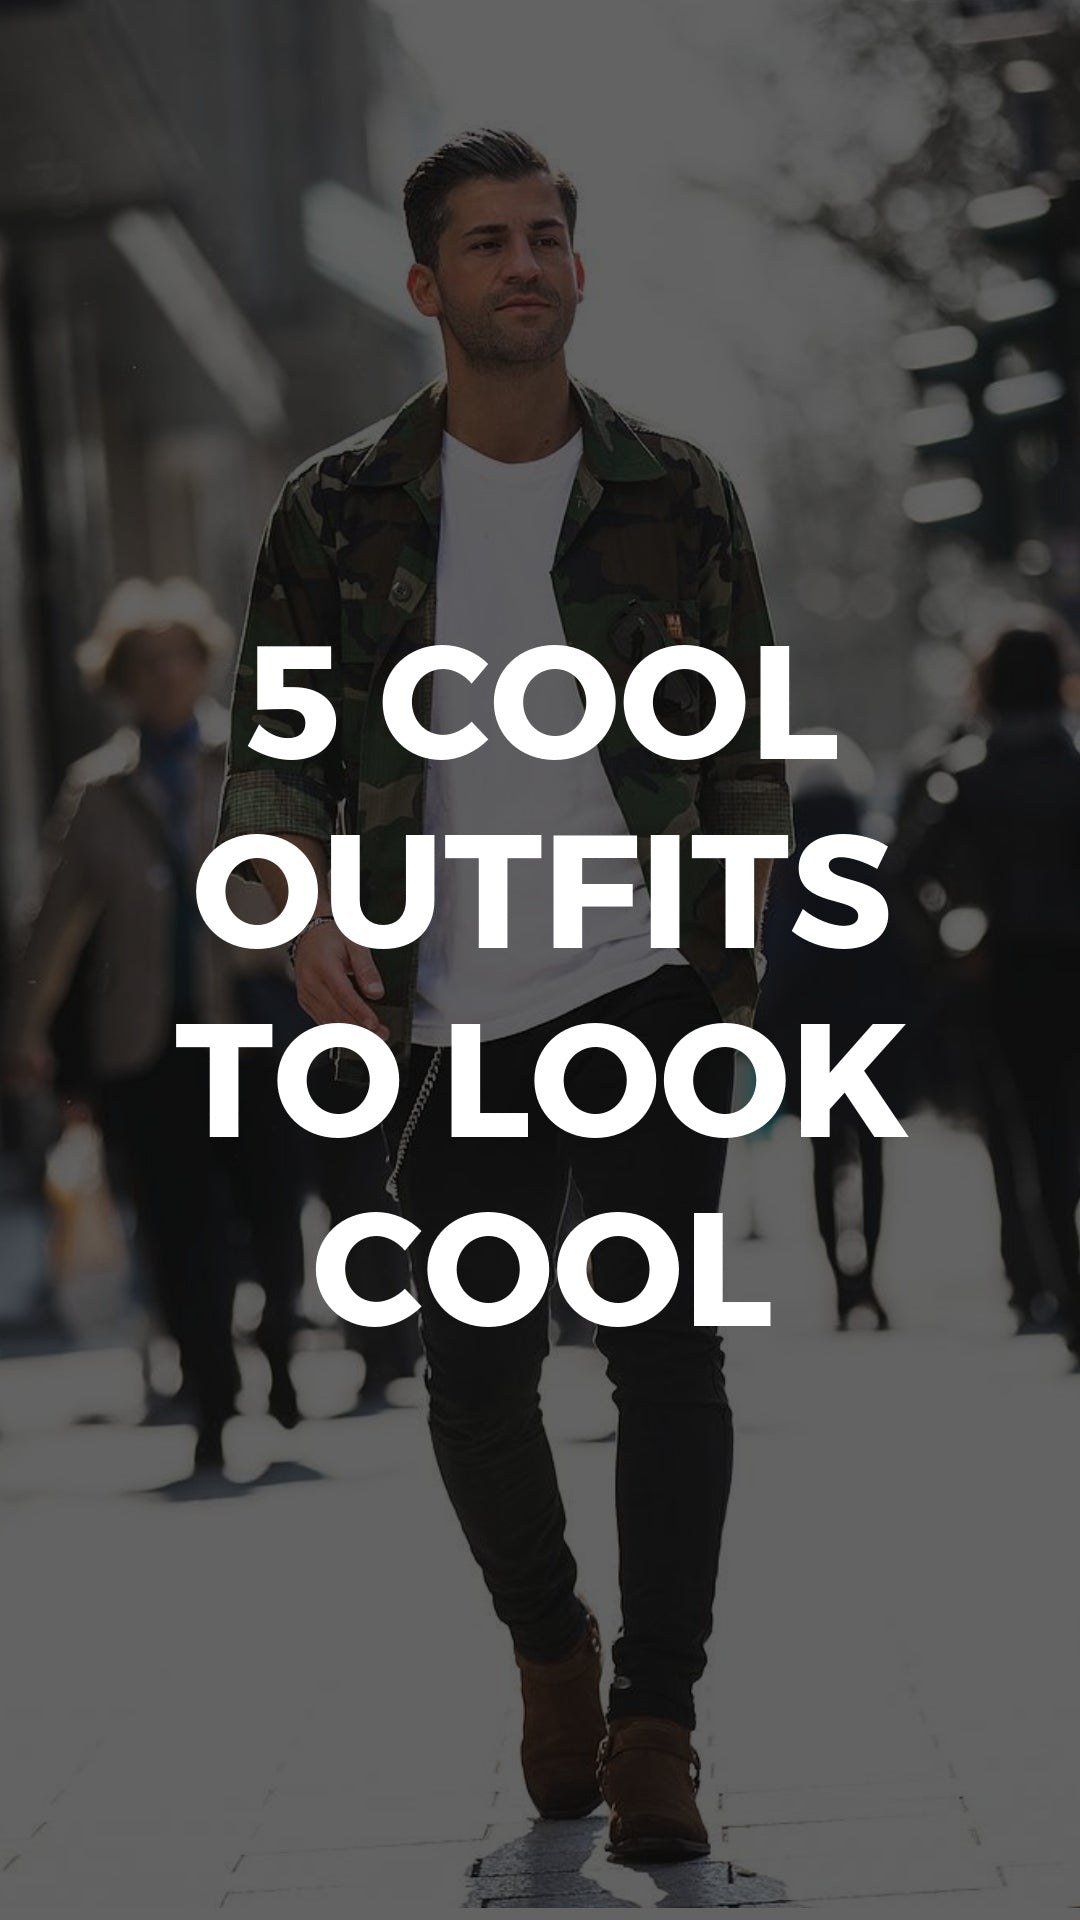 5 Epic Outfits We Bookmarked From This Celeb's Instagram Account #street #style #mens #fashion